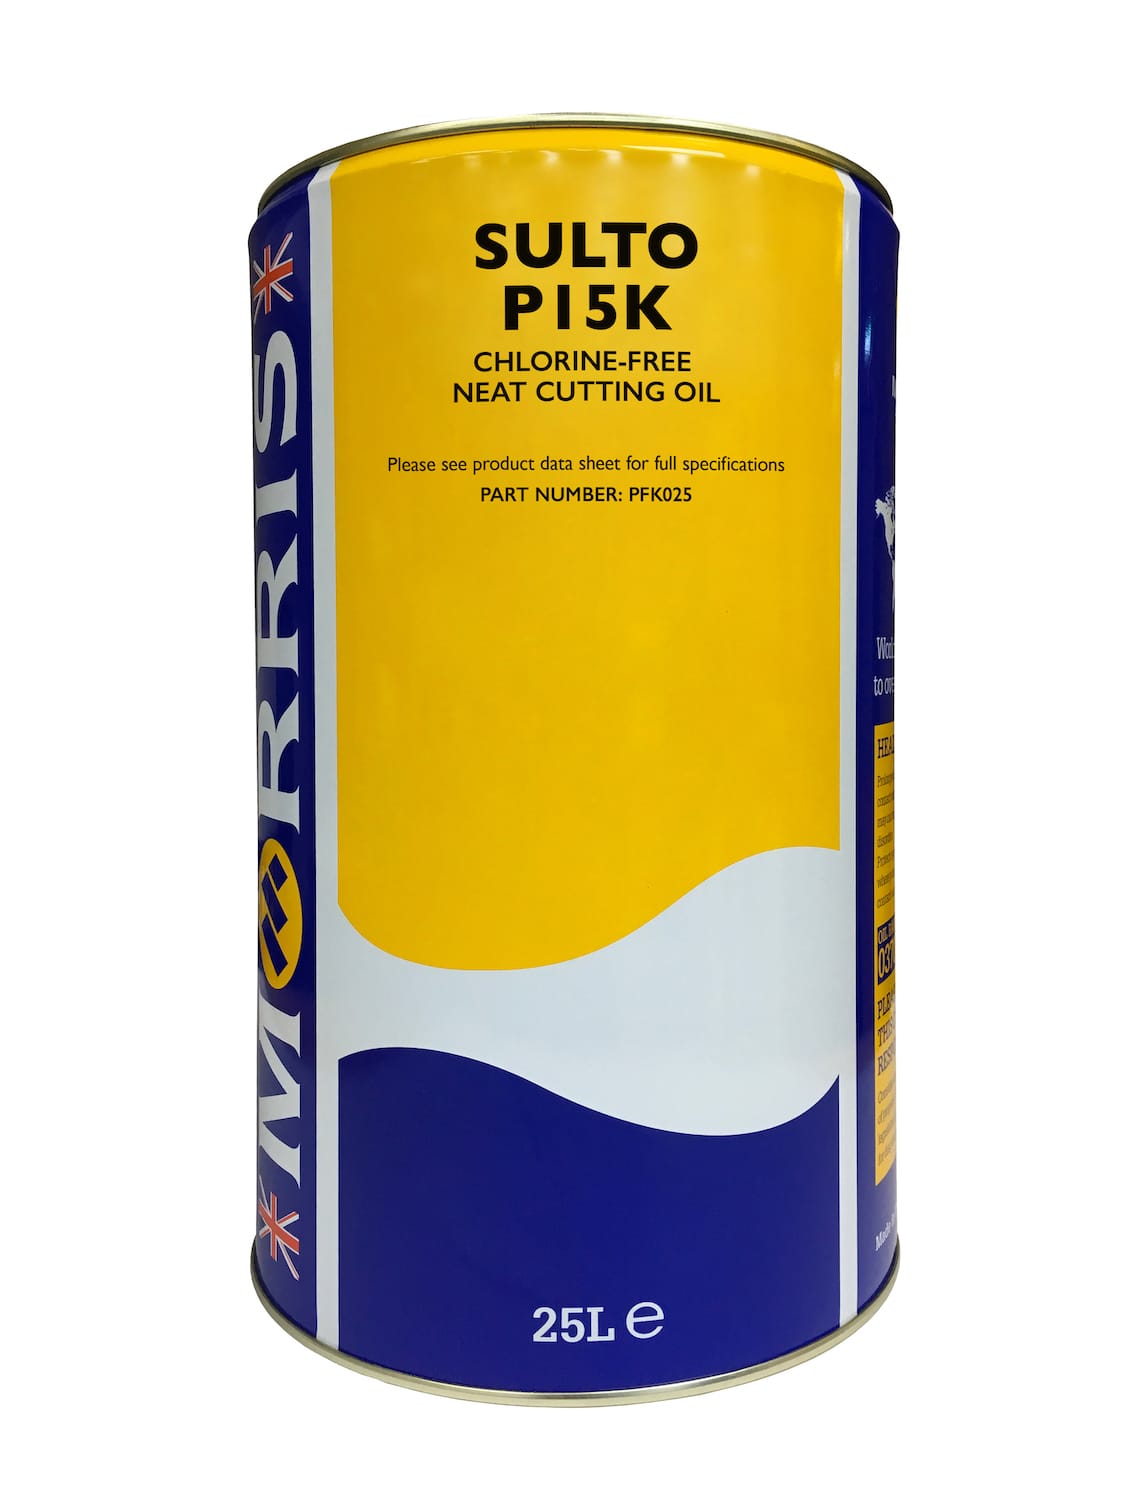 Sulto P15K Chlorine Free Neat Cutting Oil